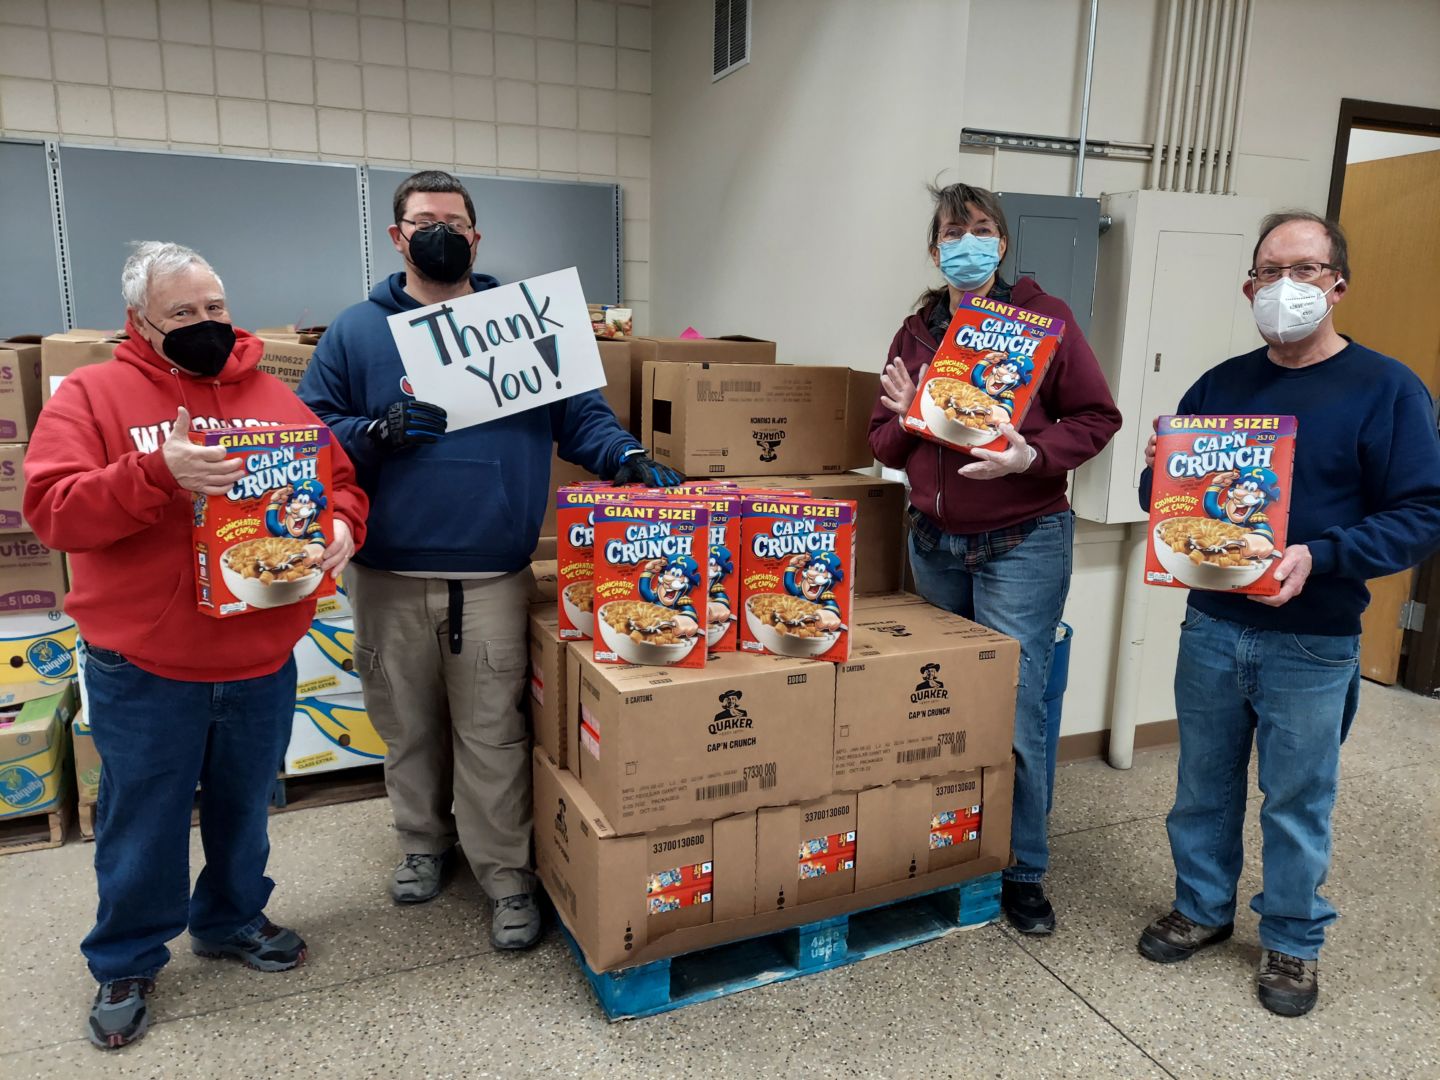 Four volunteers and staff standing buy a pallet full of Cap'n Crunch cereal boxes, holding a sign which reads, "Thank you!"